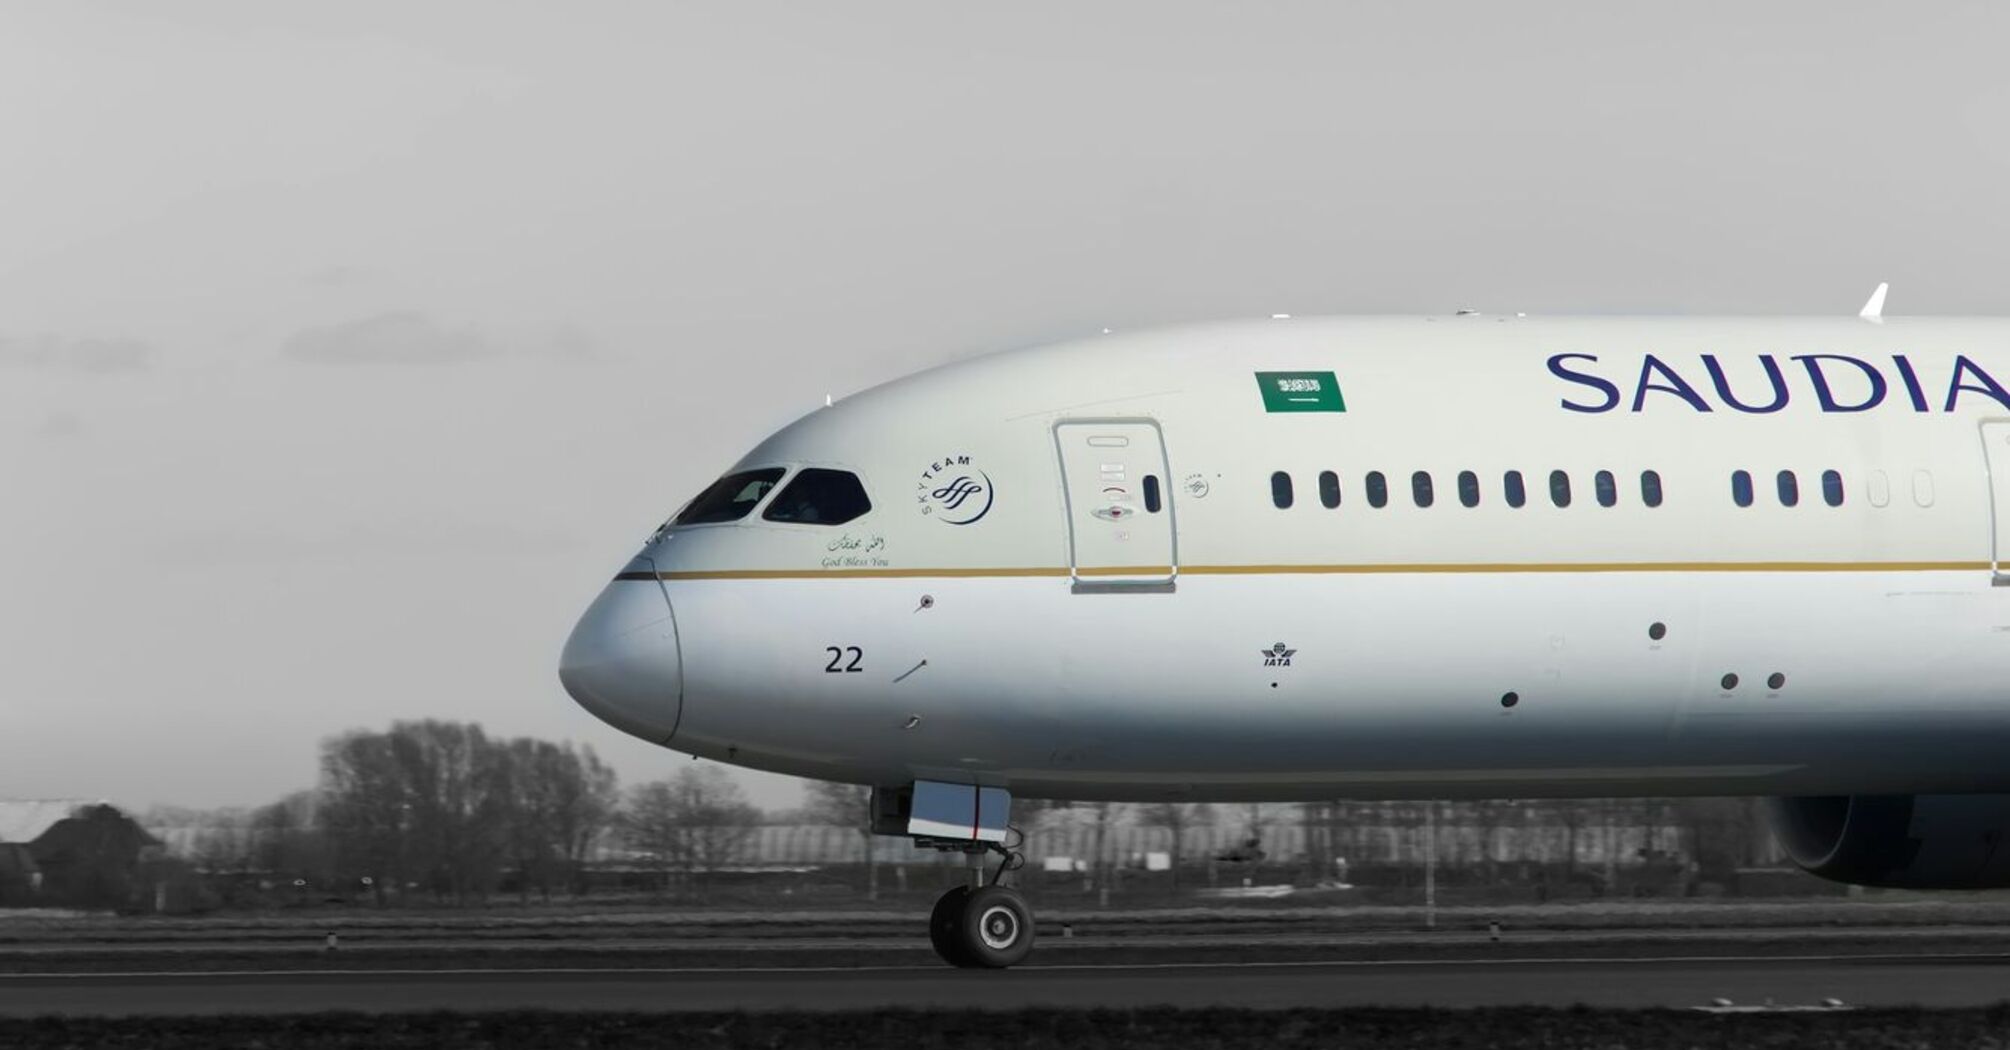 Saudia airline aircraft taxiing on runway with cloudy background